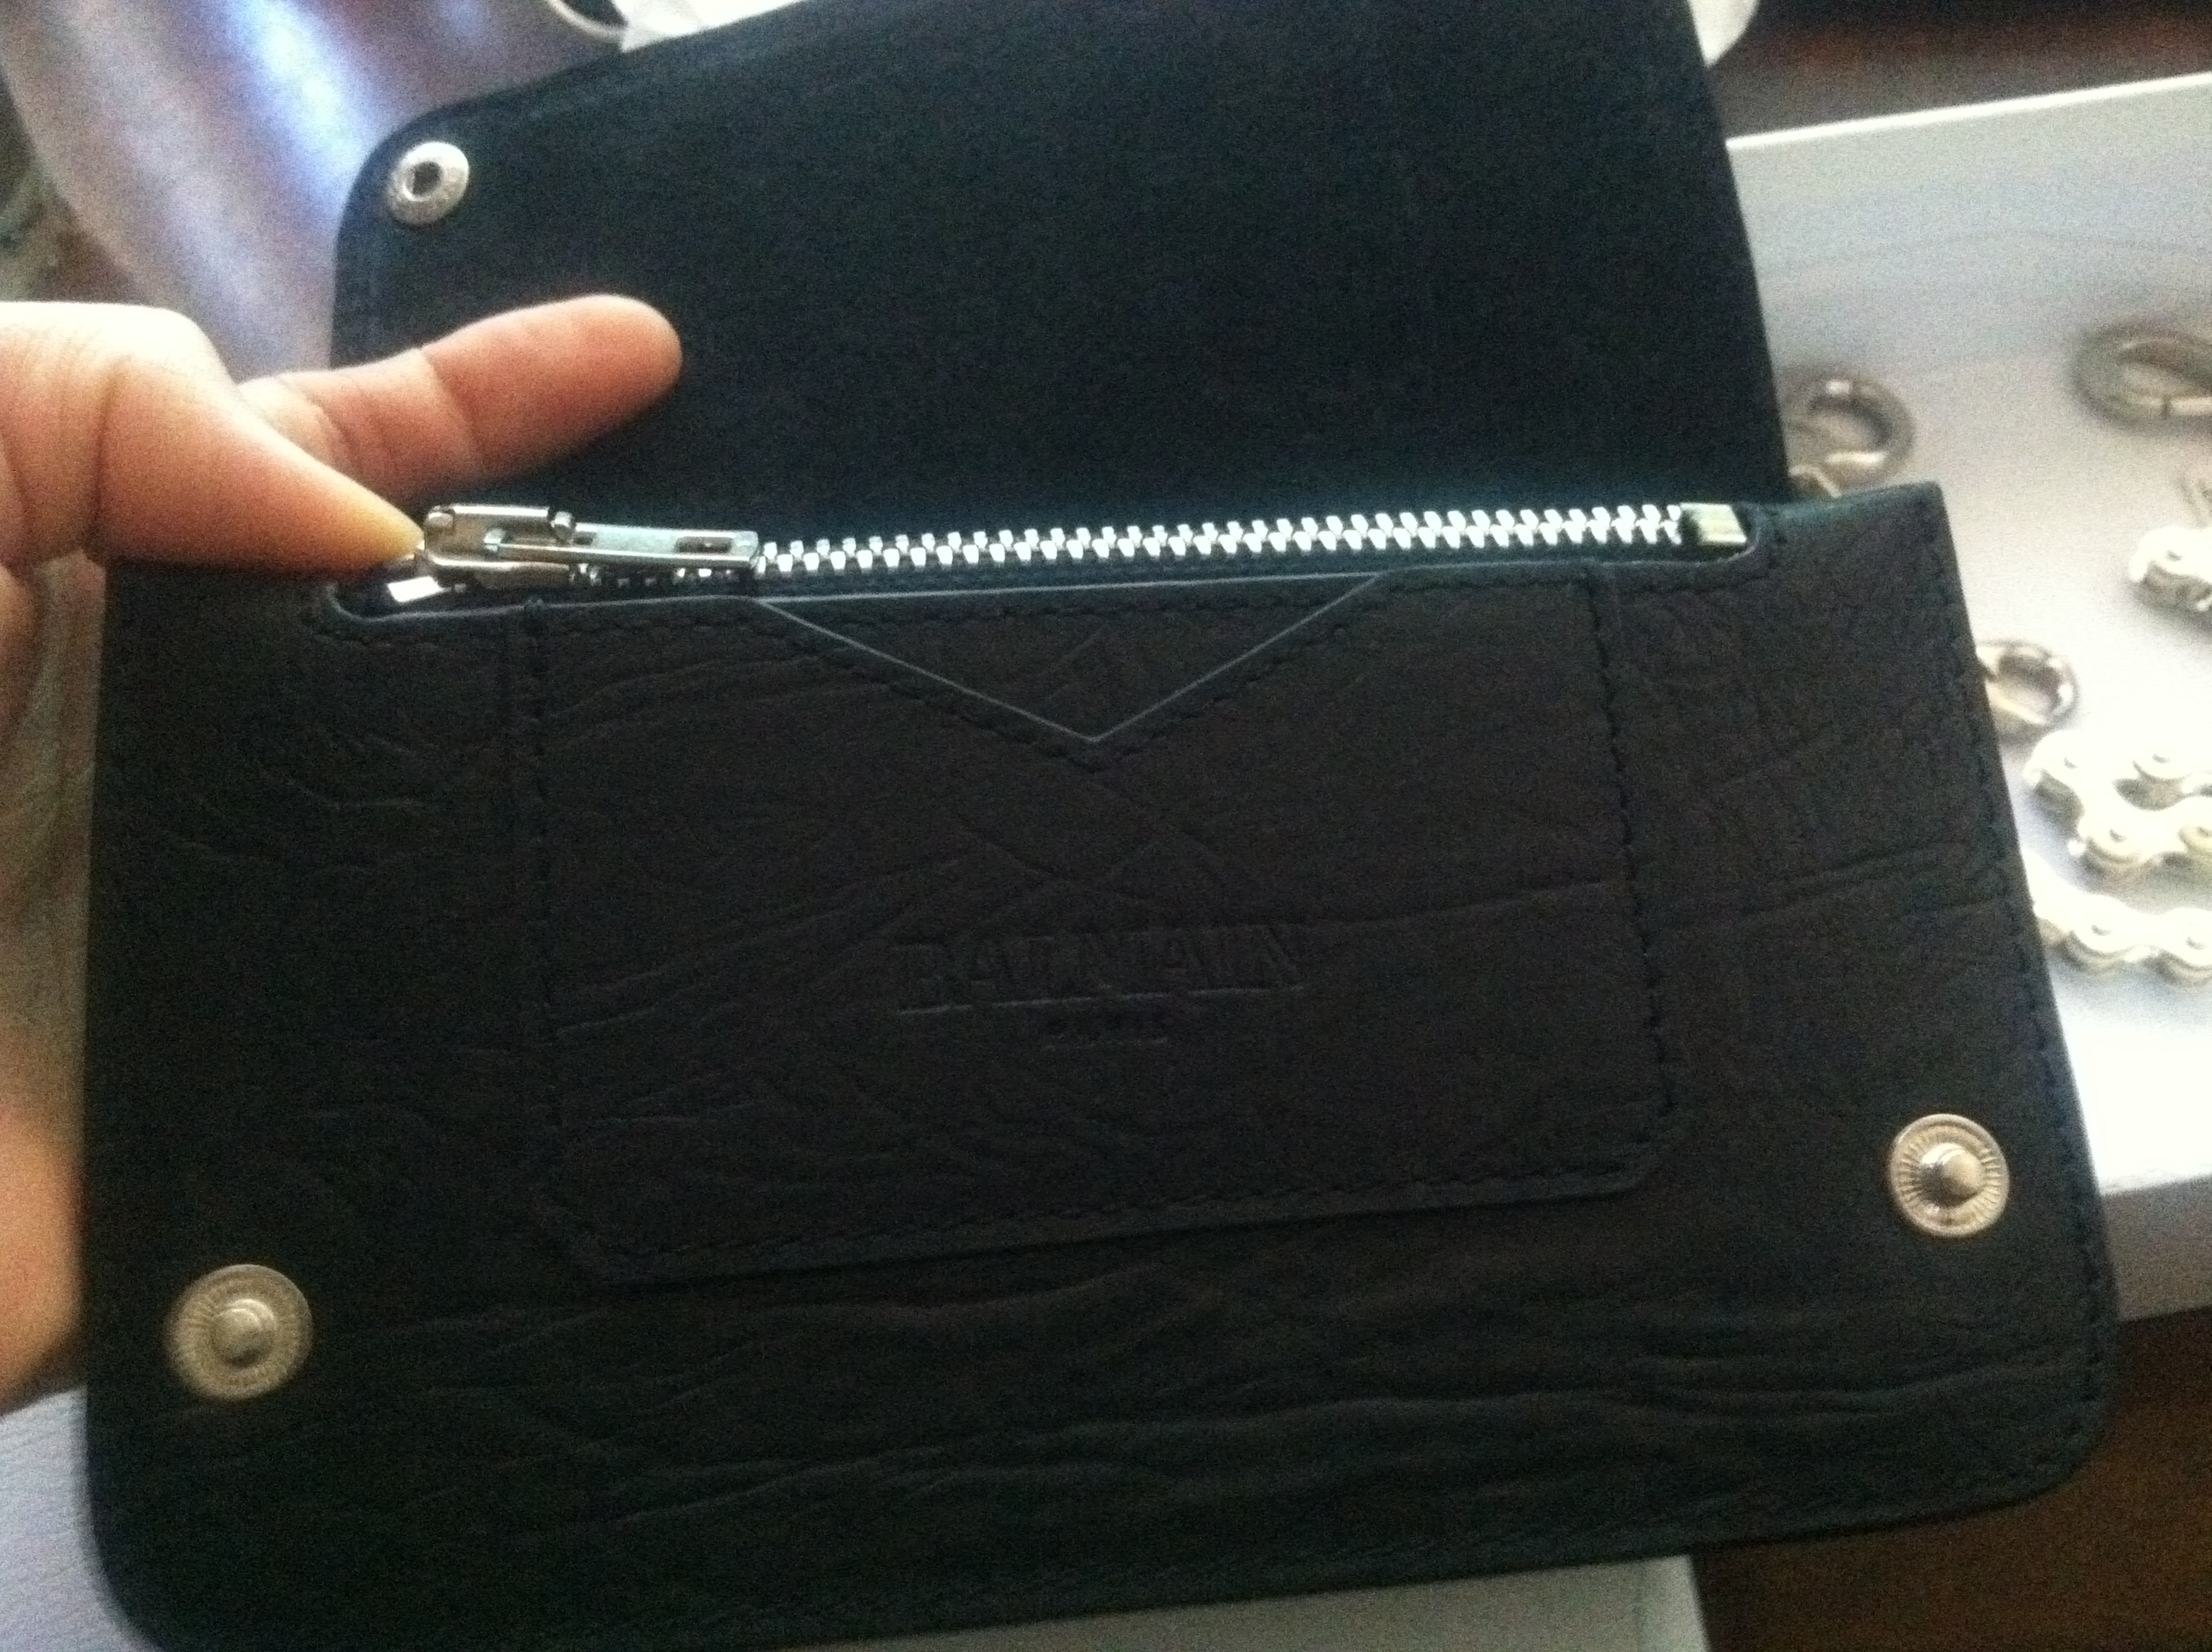 Is this Balmain chain wallet authentic? | Styleforum